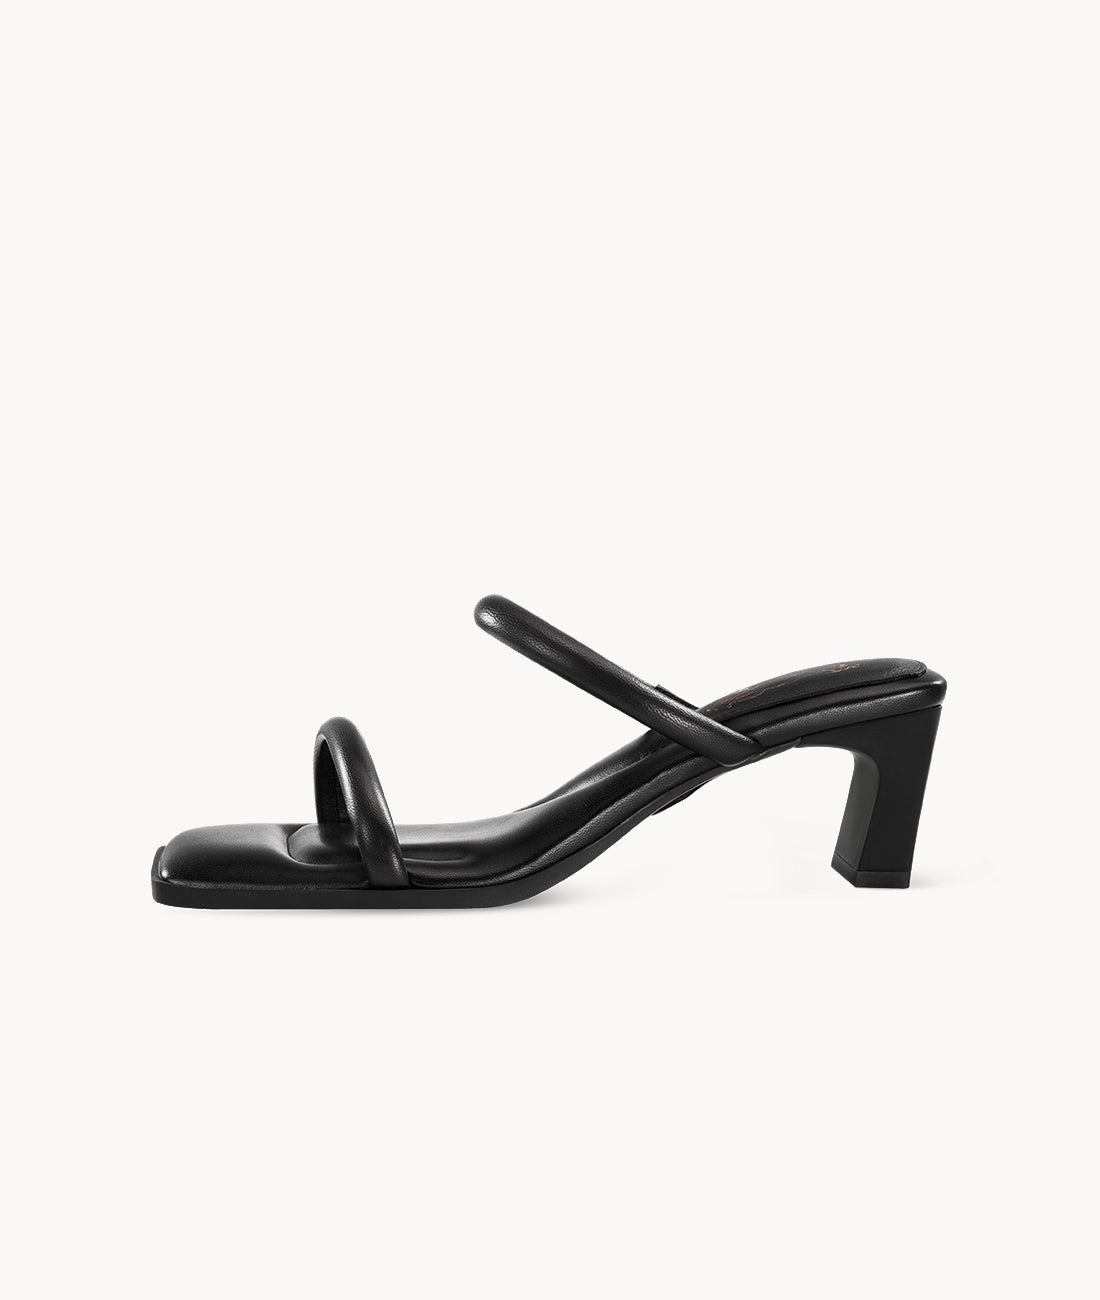 Black womens leather sandals